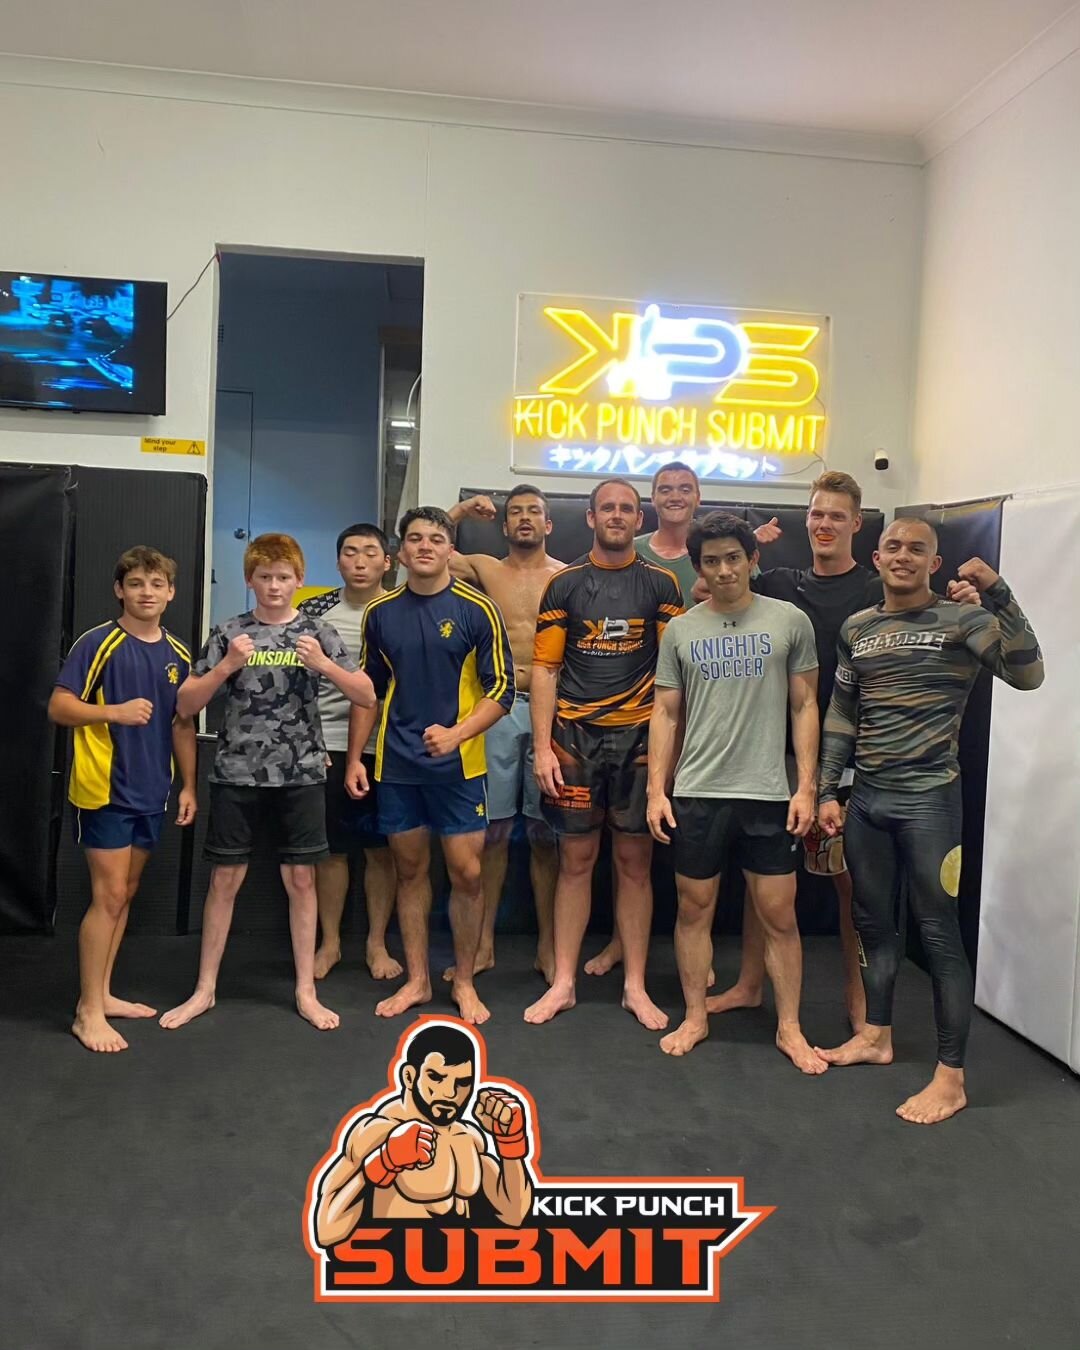 Monday night is fundamentals night! Get started with your journey into Submission Grappling with us every Monday at 6pm!! Then jump into the icebath for good measure 🥶